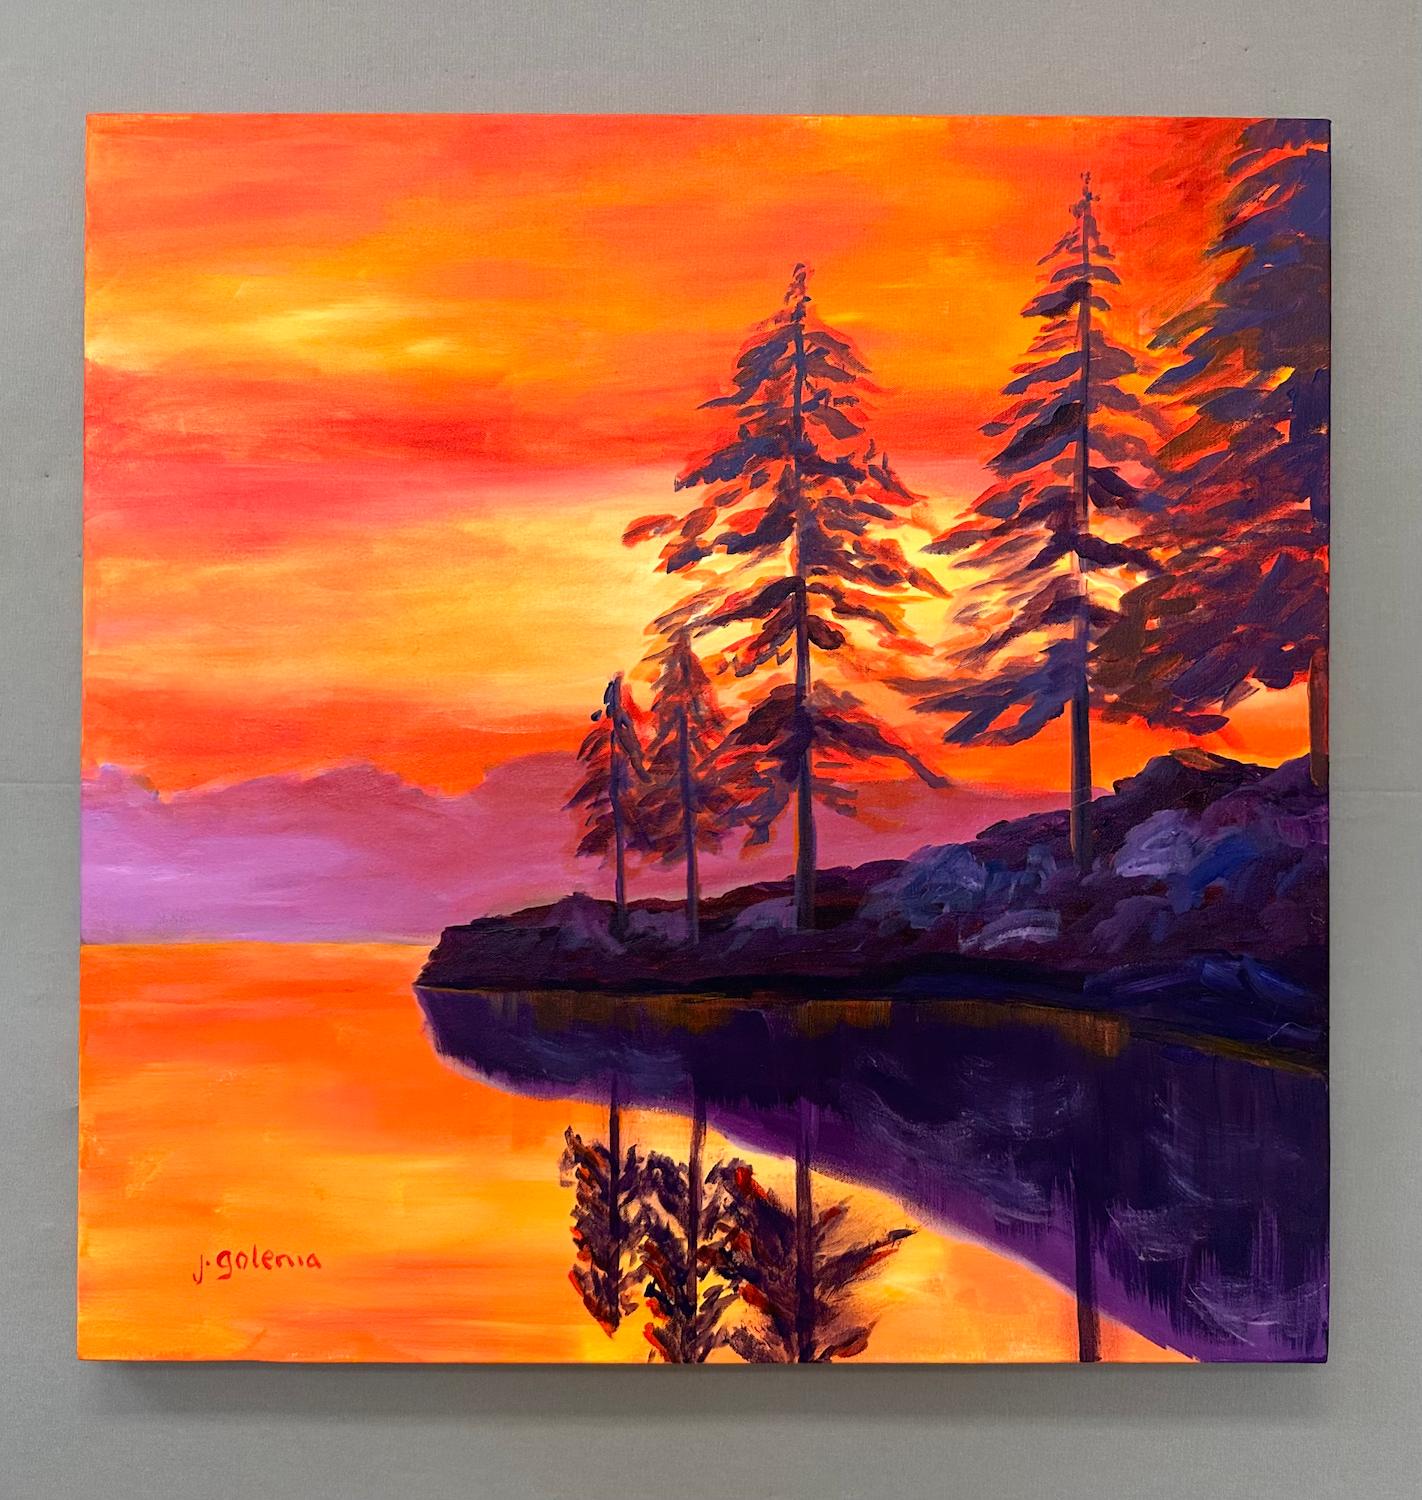 <p>Artist Comments<br>The sky glows orange, its vibrant colors reflected upon the lake. Pine trees grace the horizon with their distinct silhouettes. While the far shore emits a faint glow, the near outcrop remains in deep shadows. As the sun sets,